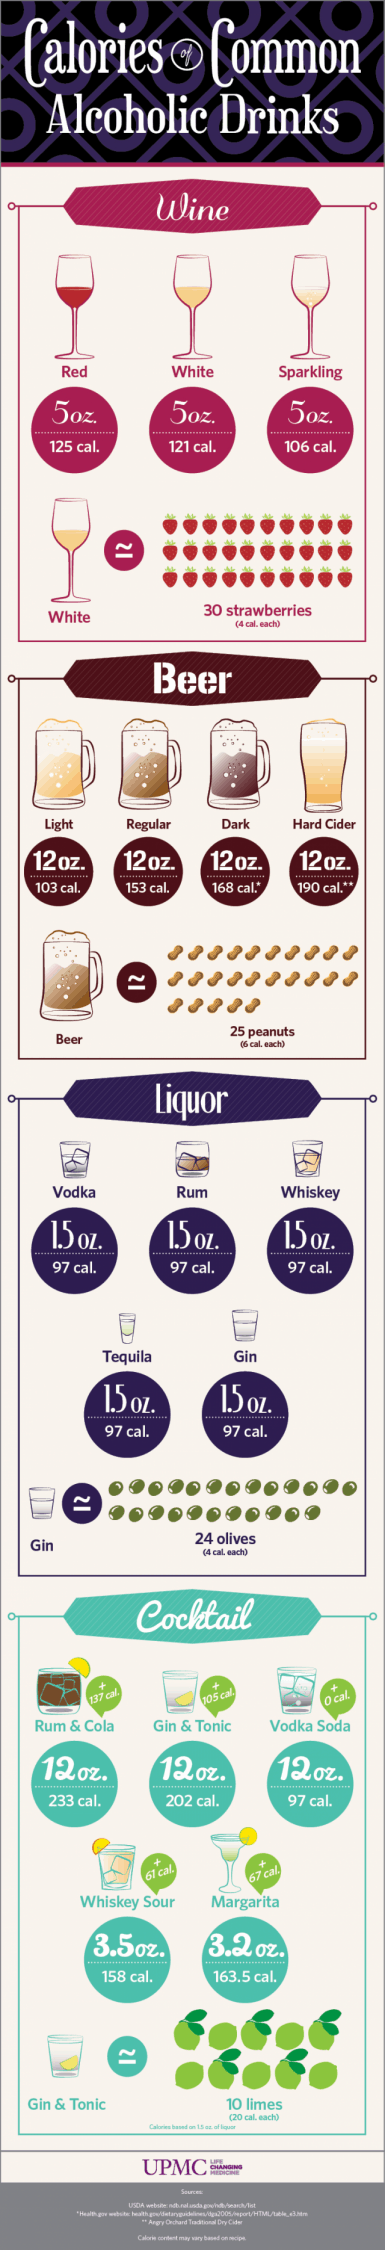 Just How Many Calories are you Drinking?|Craving Something Healthy